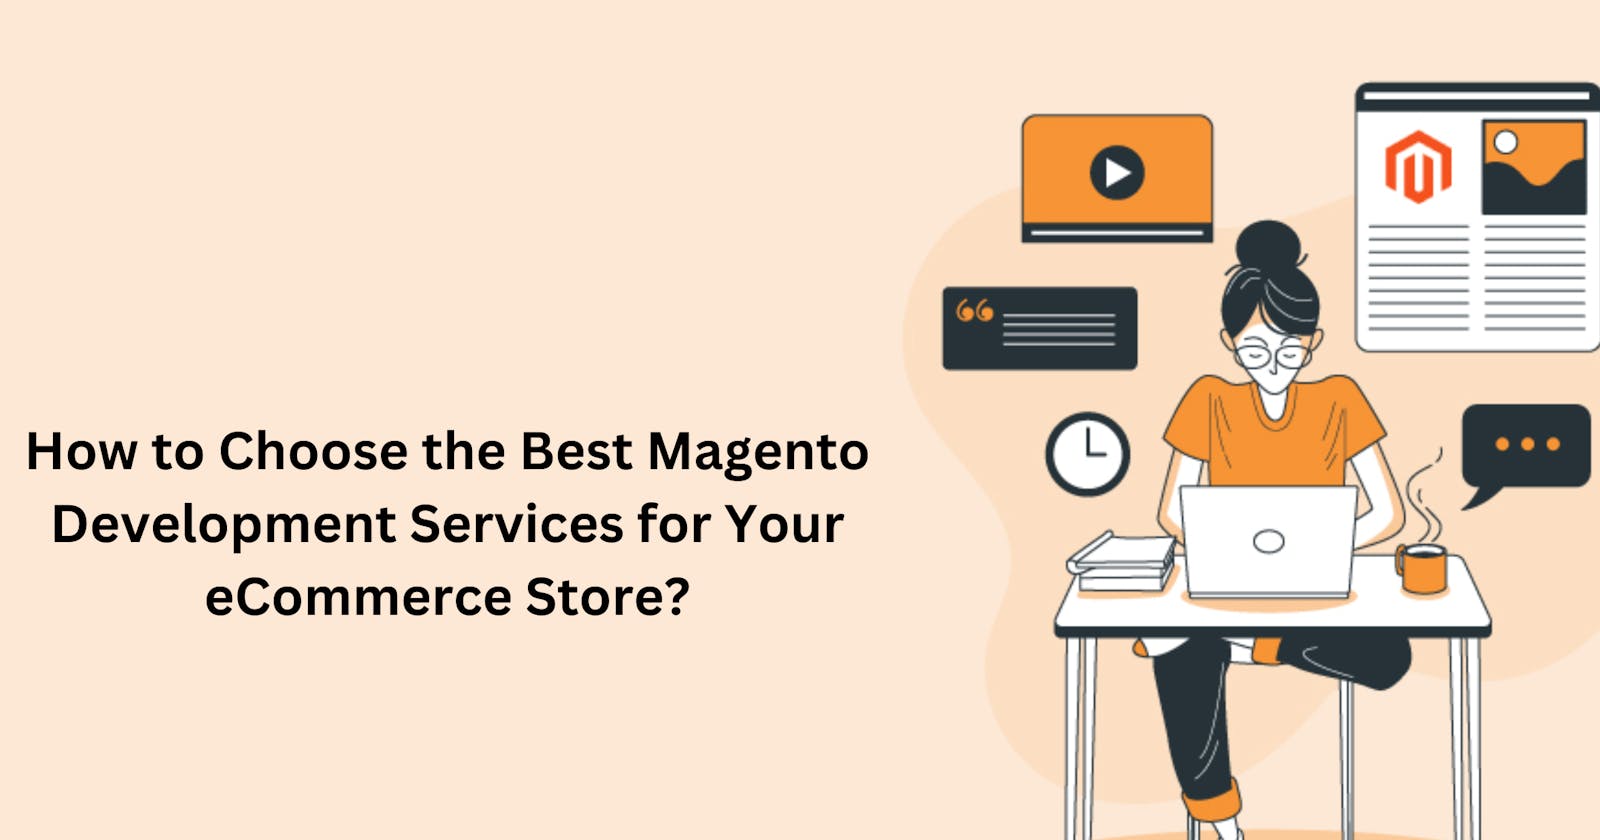 How to Choose the Best Magento Development Services for Your eCommerce Store?